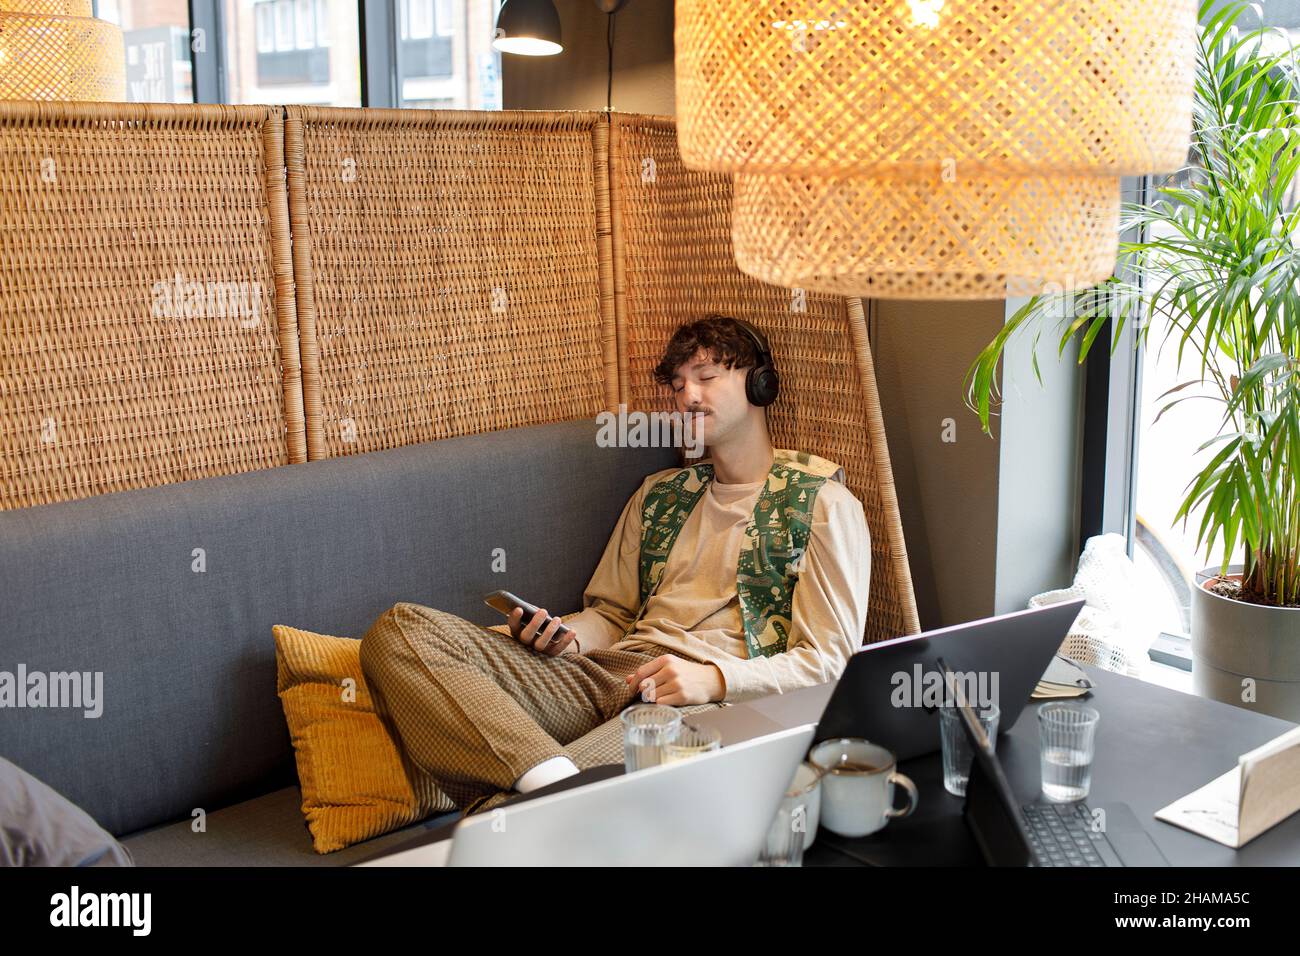 Young man relaxing in cafe Stock Photo